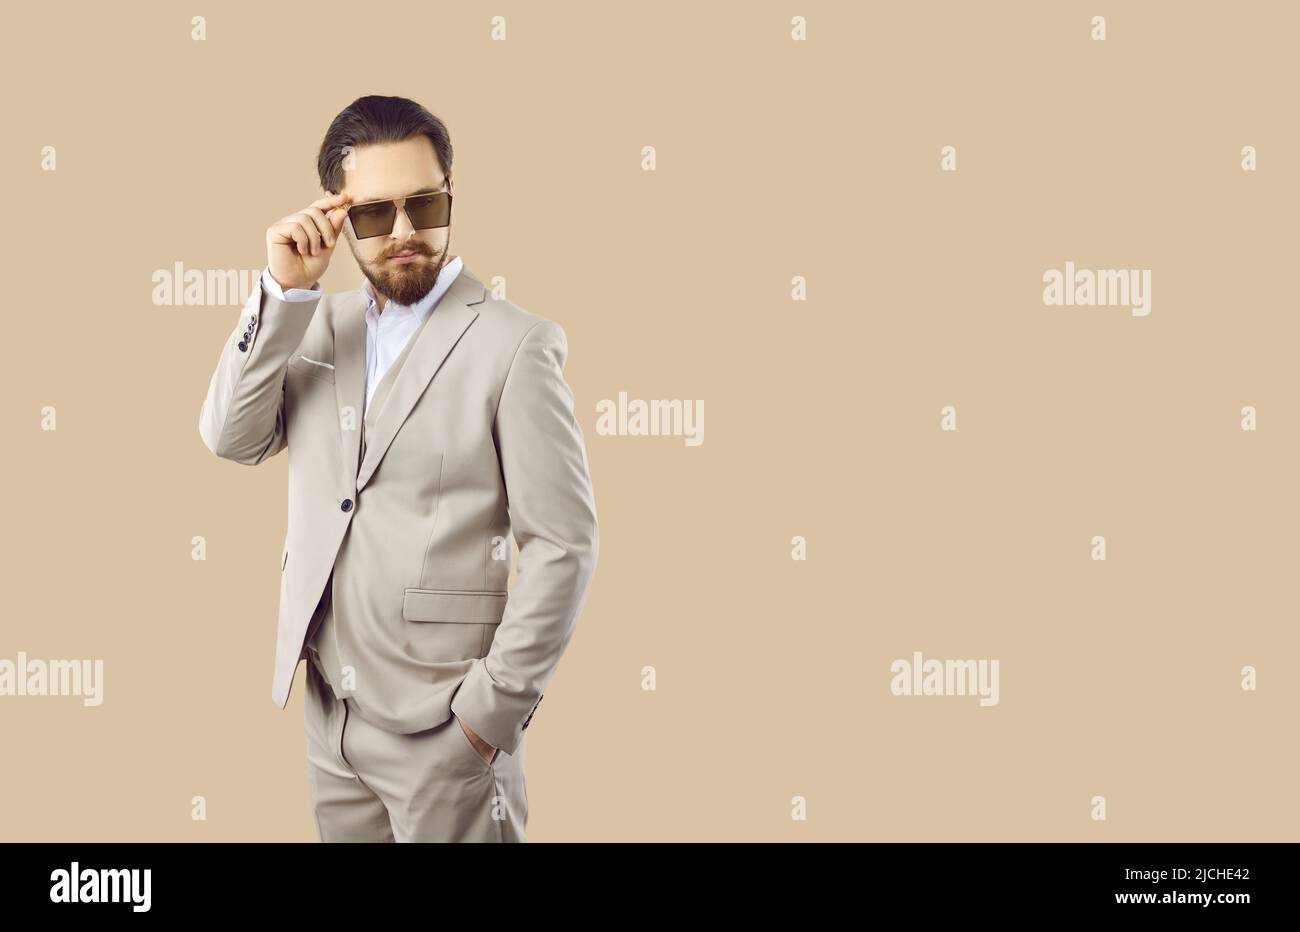 Business man in elegant suit and sunglasses posing on blank beige copy space background Stock Photo